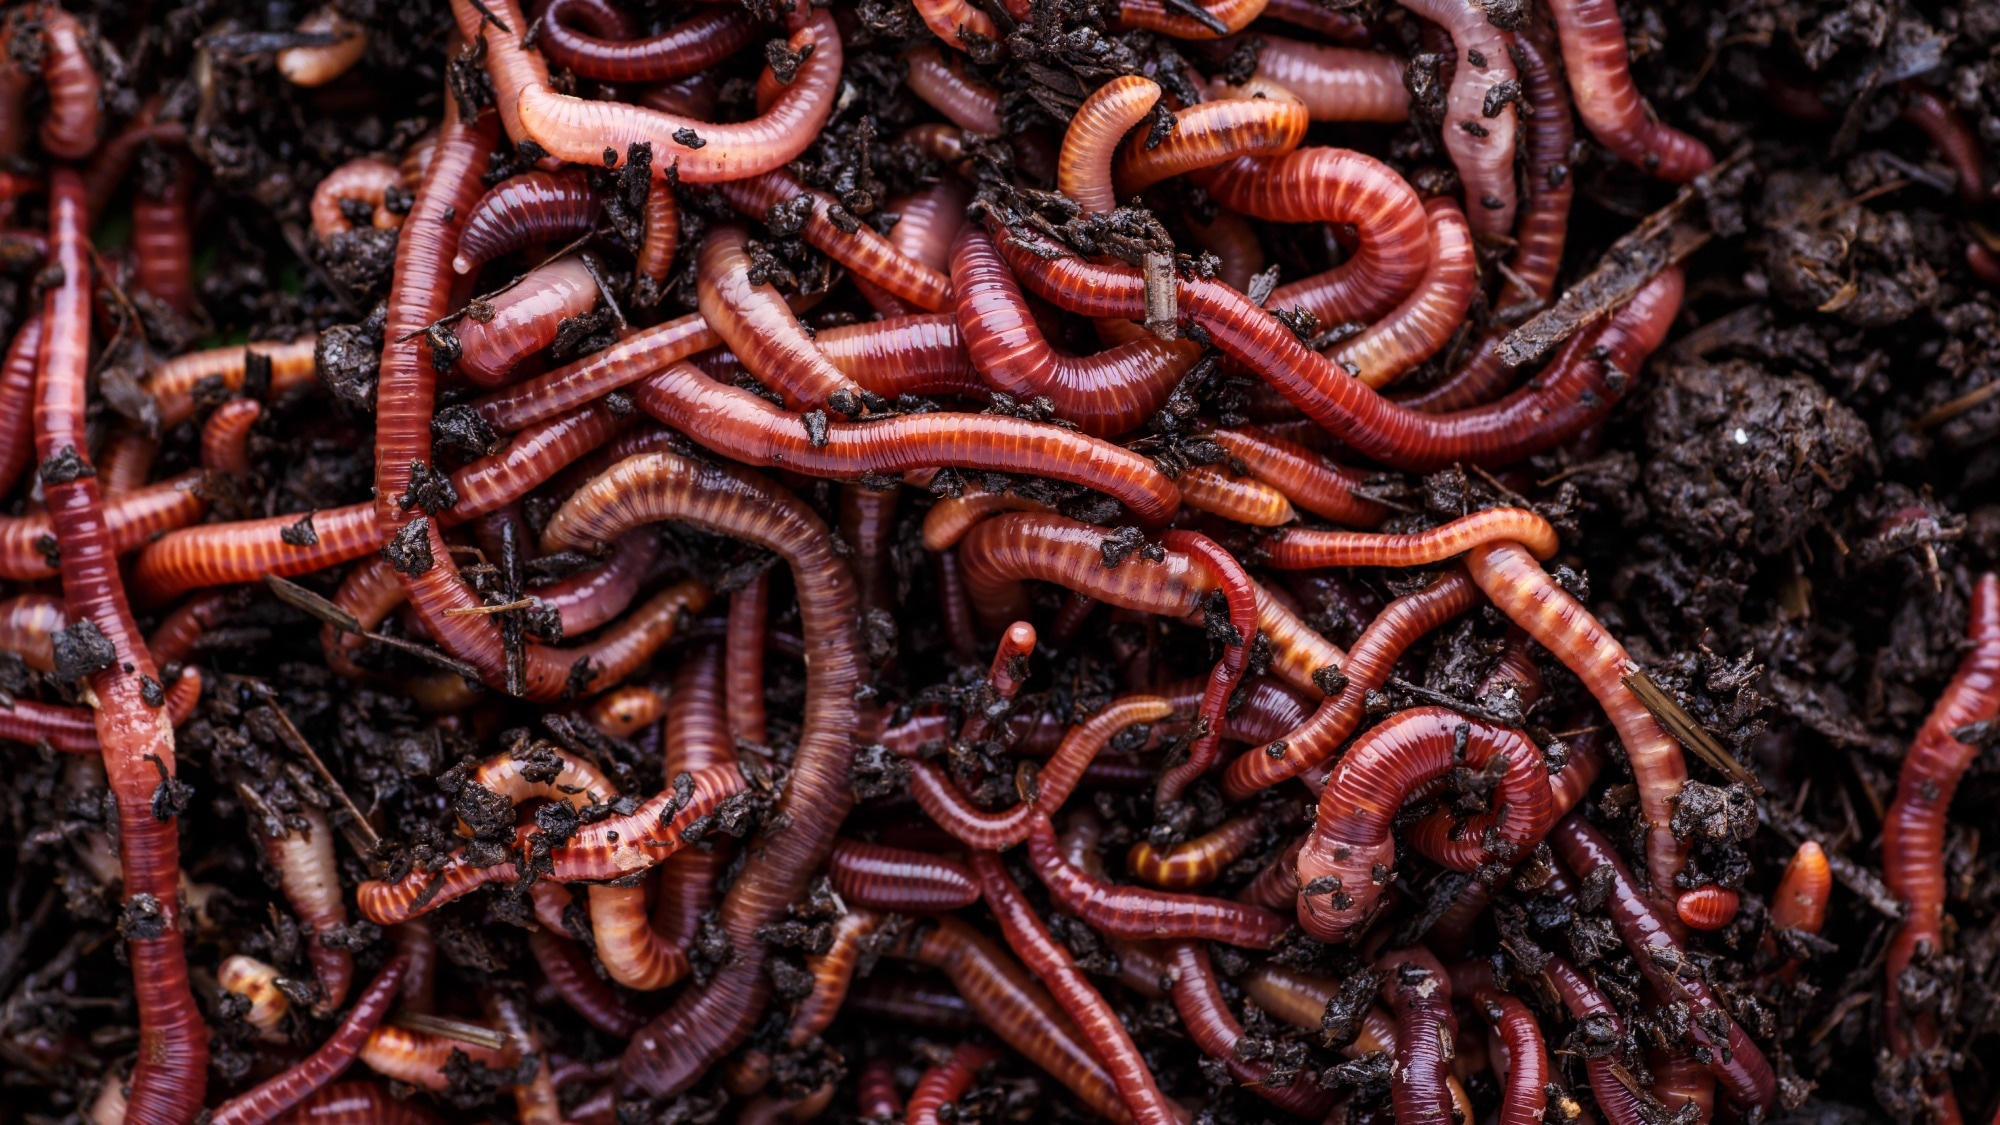 Study: Earthworms contribute significantly to global food production. Image Credit: Bukhta Yurii / Shutterstock